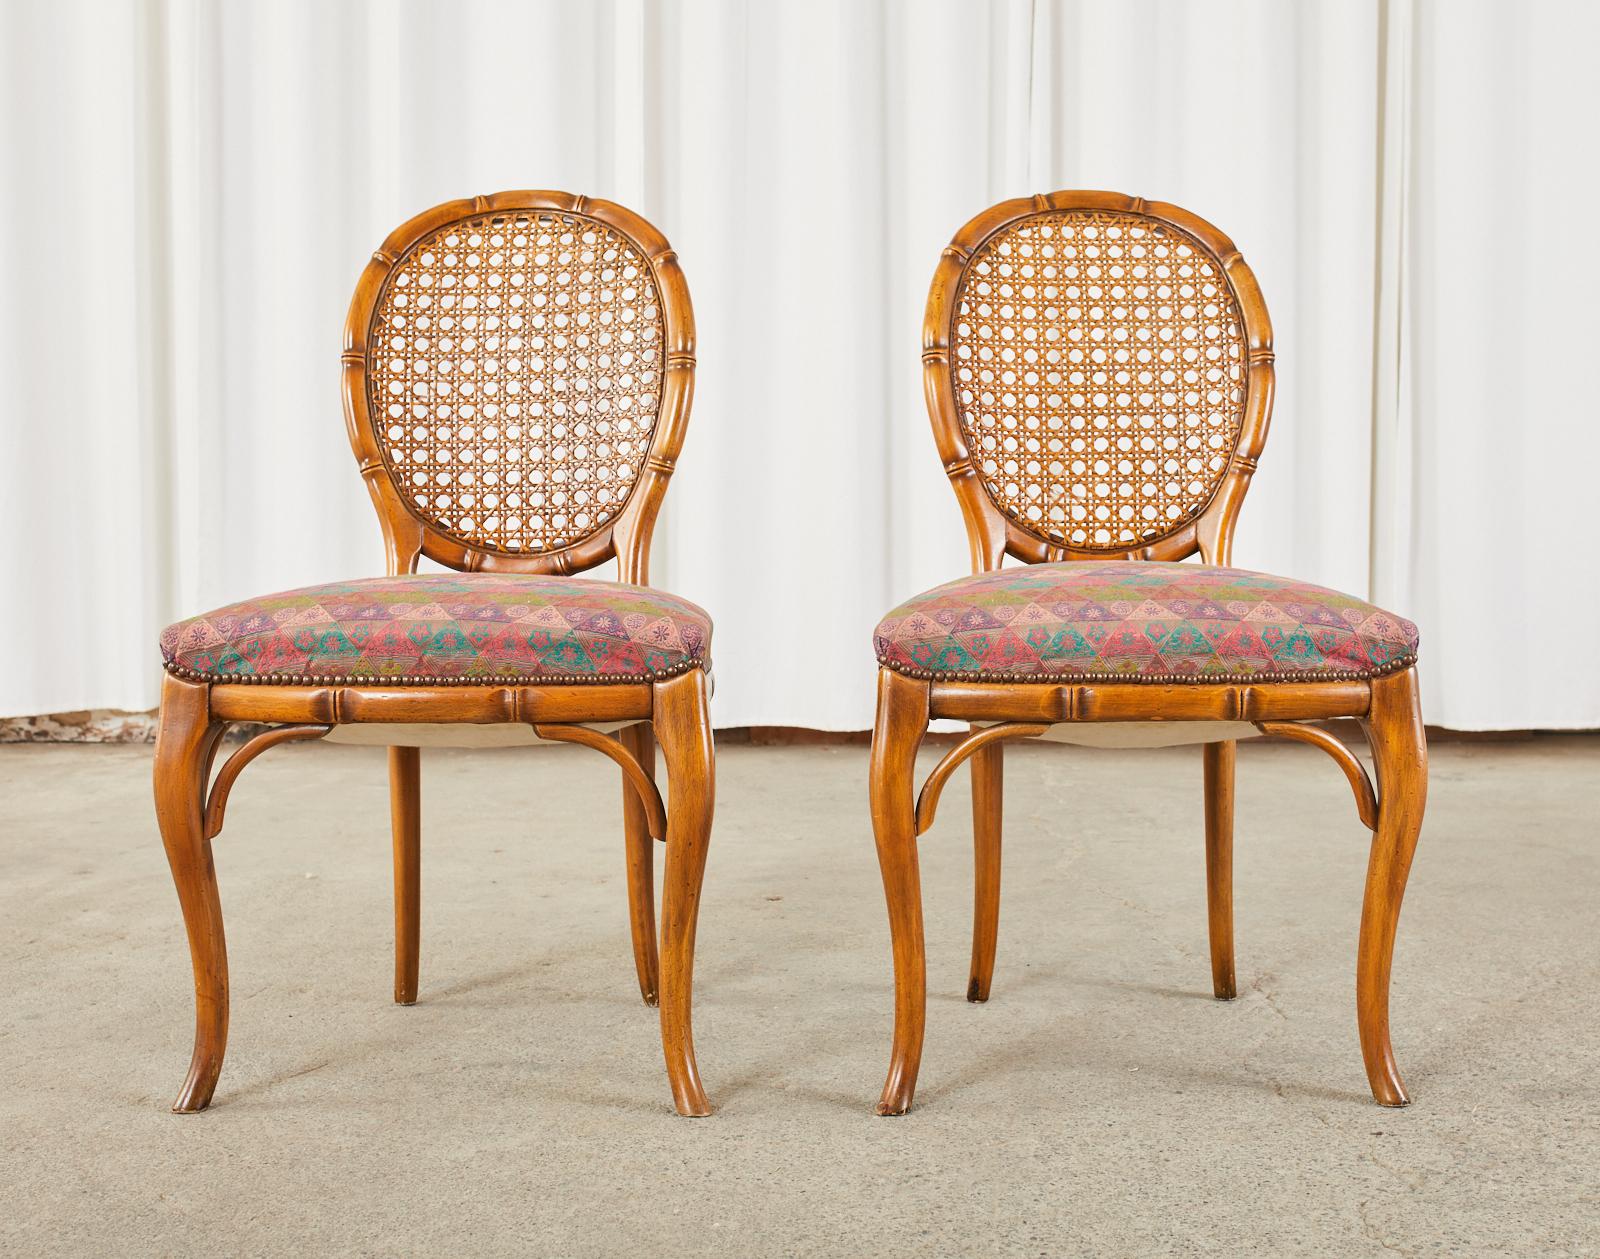 Hollywood regency pair of carved faux bamboo dining chairs made in the mid-20th century. The chairs feature a round bamboo carved back inset with cane. The seats are upholstered with a late 20th century geometric fabric bordered by brass tack nail